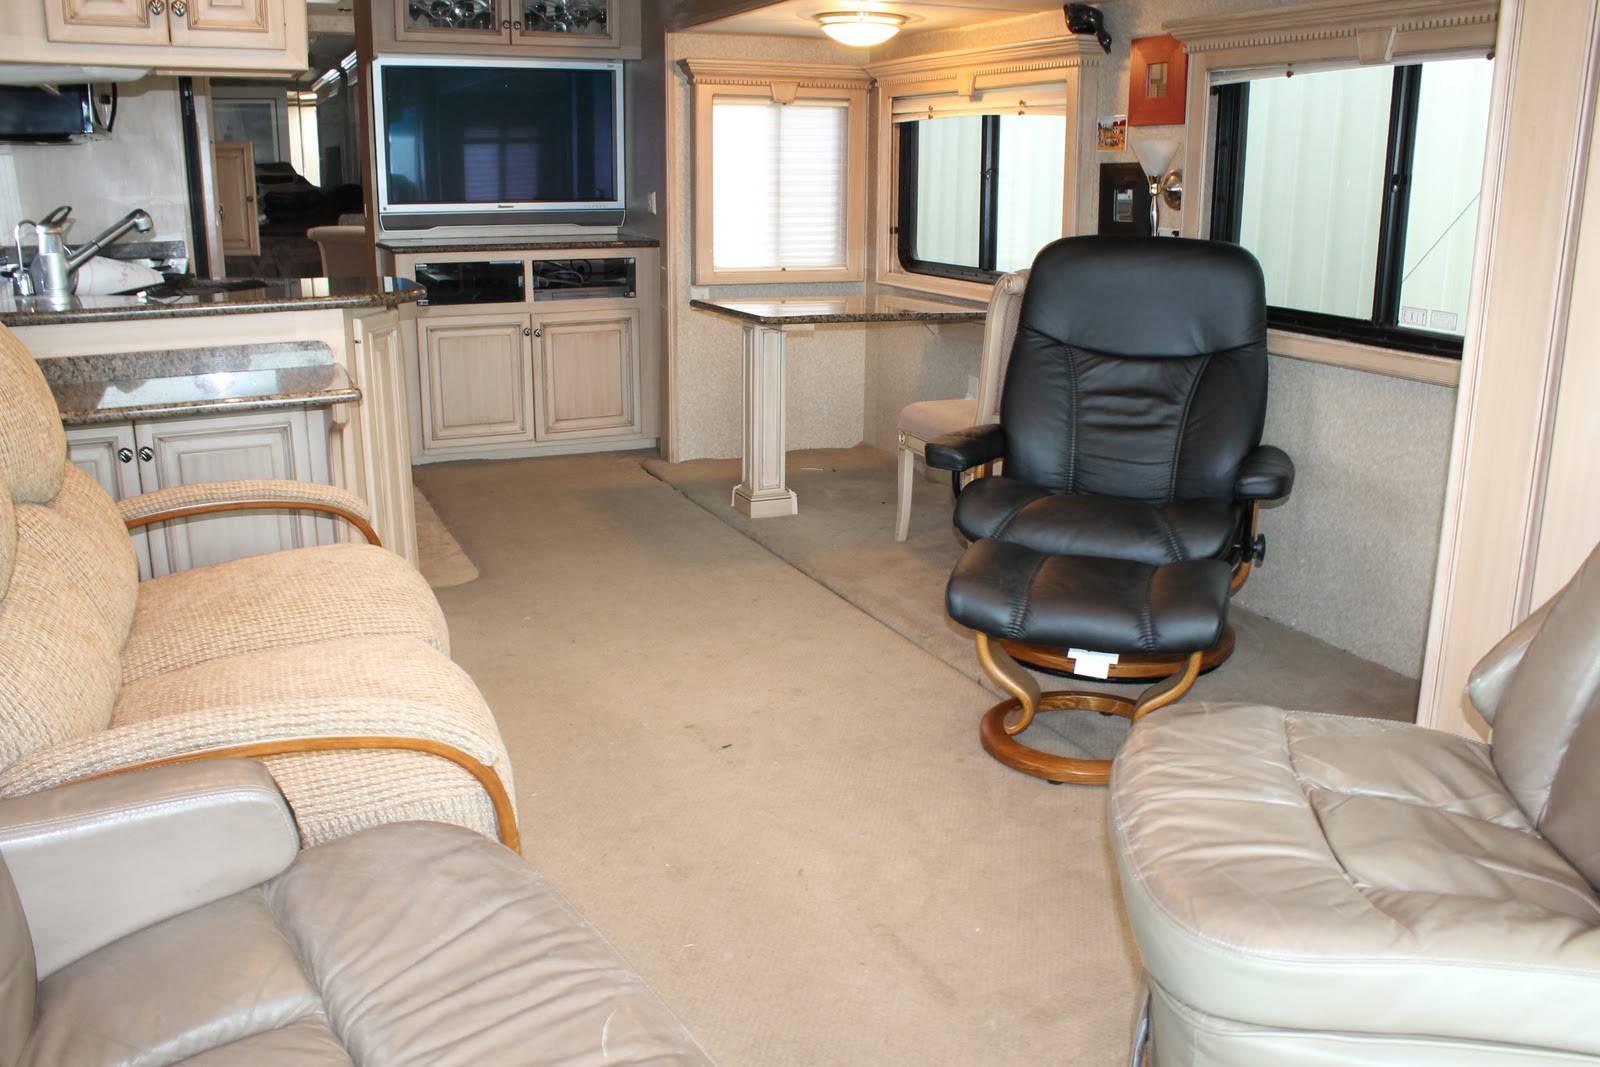 Countryside Interiors Transforming Rvs And Trailers Since